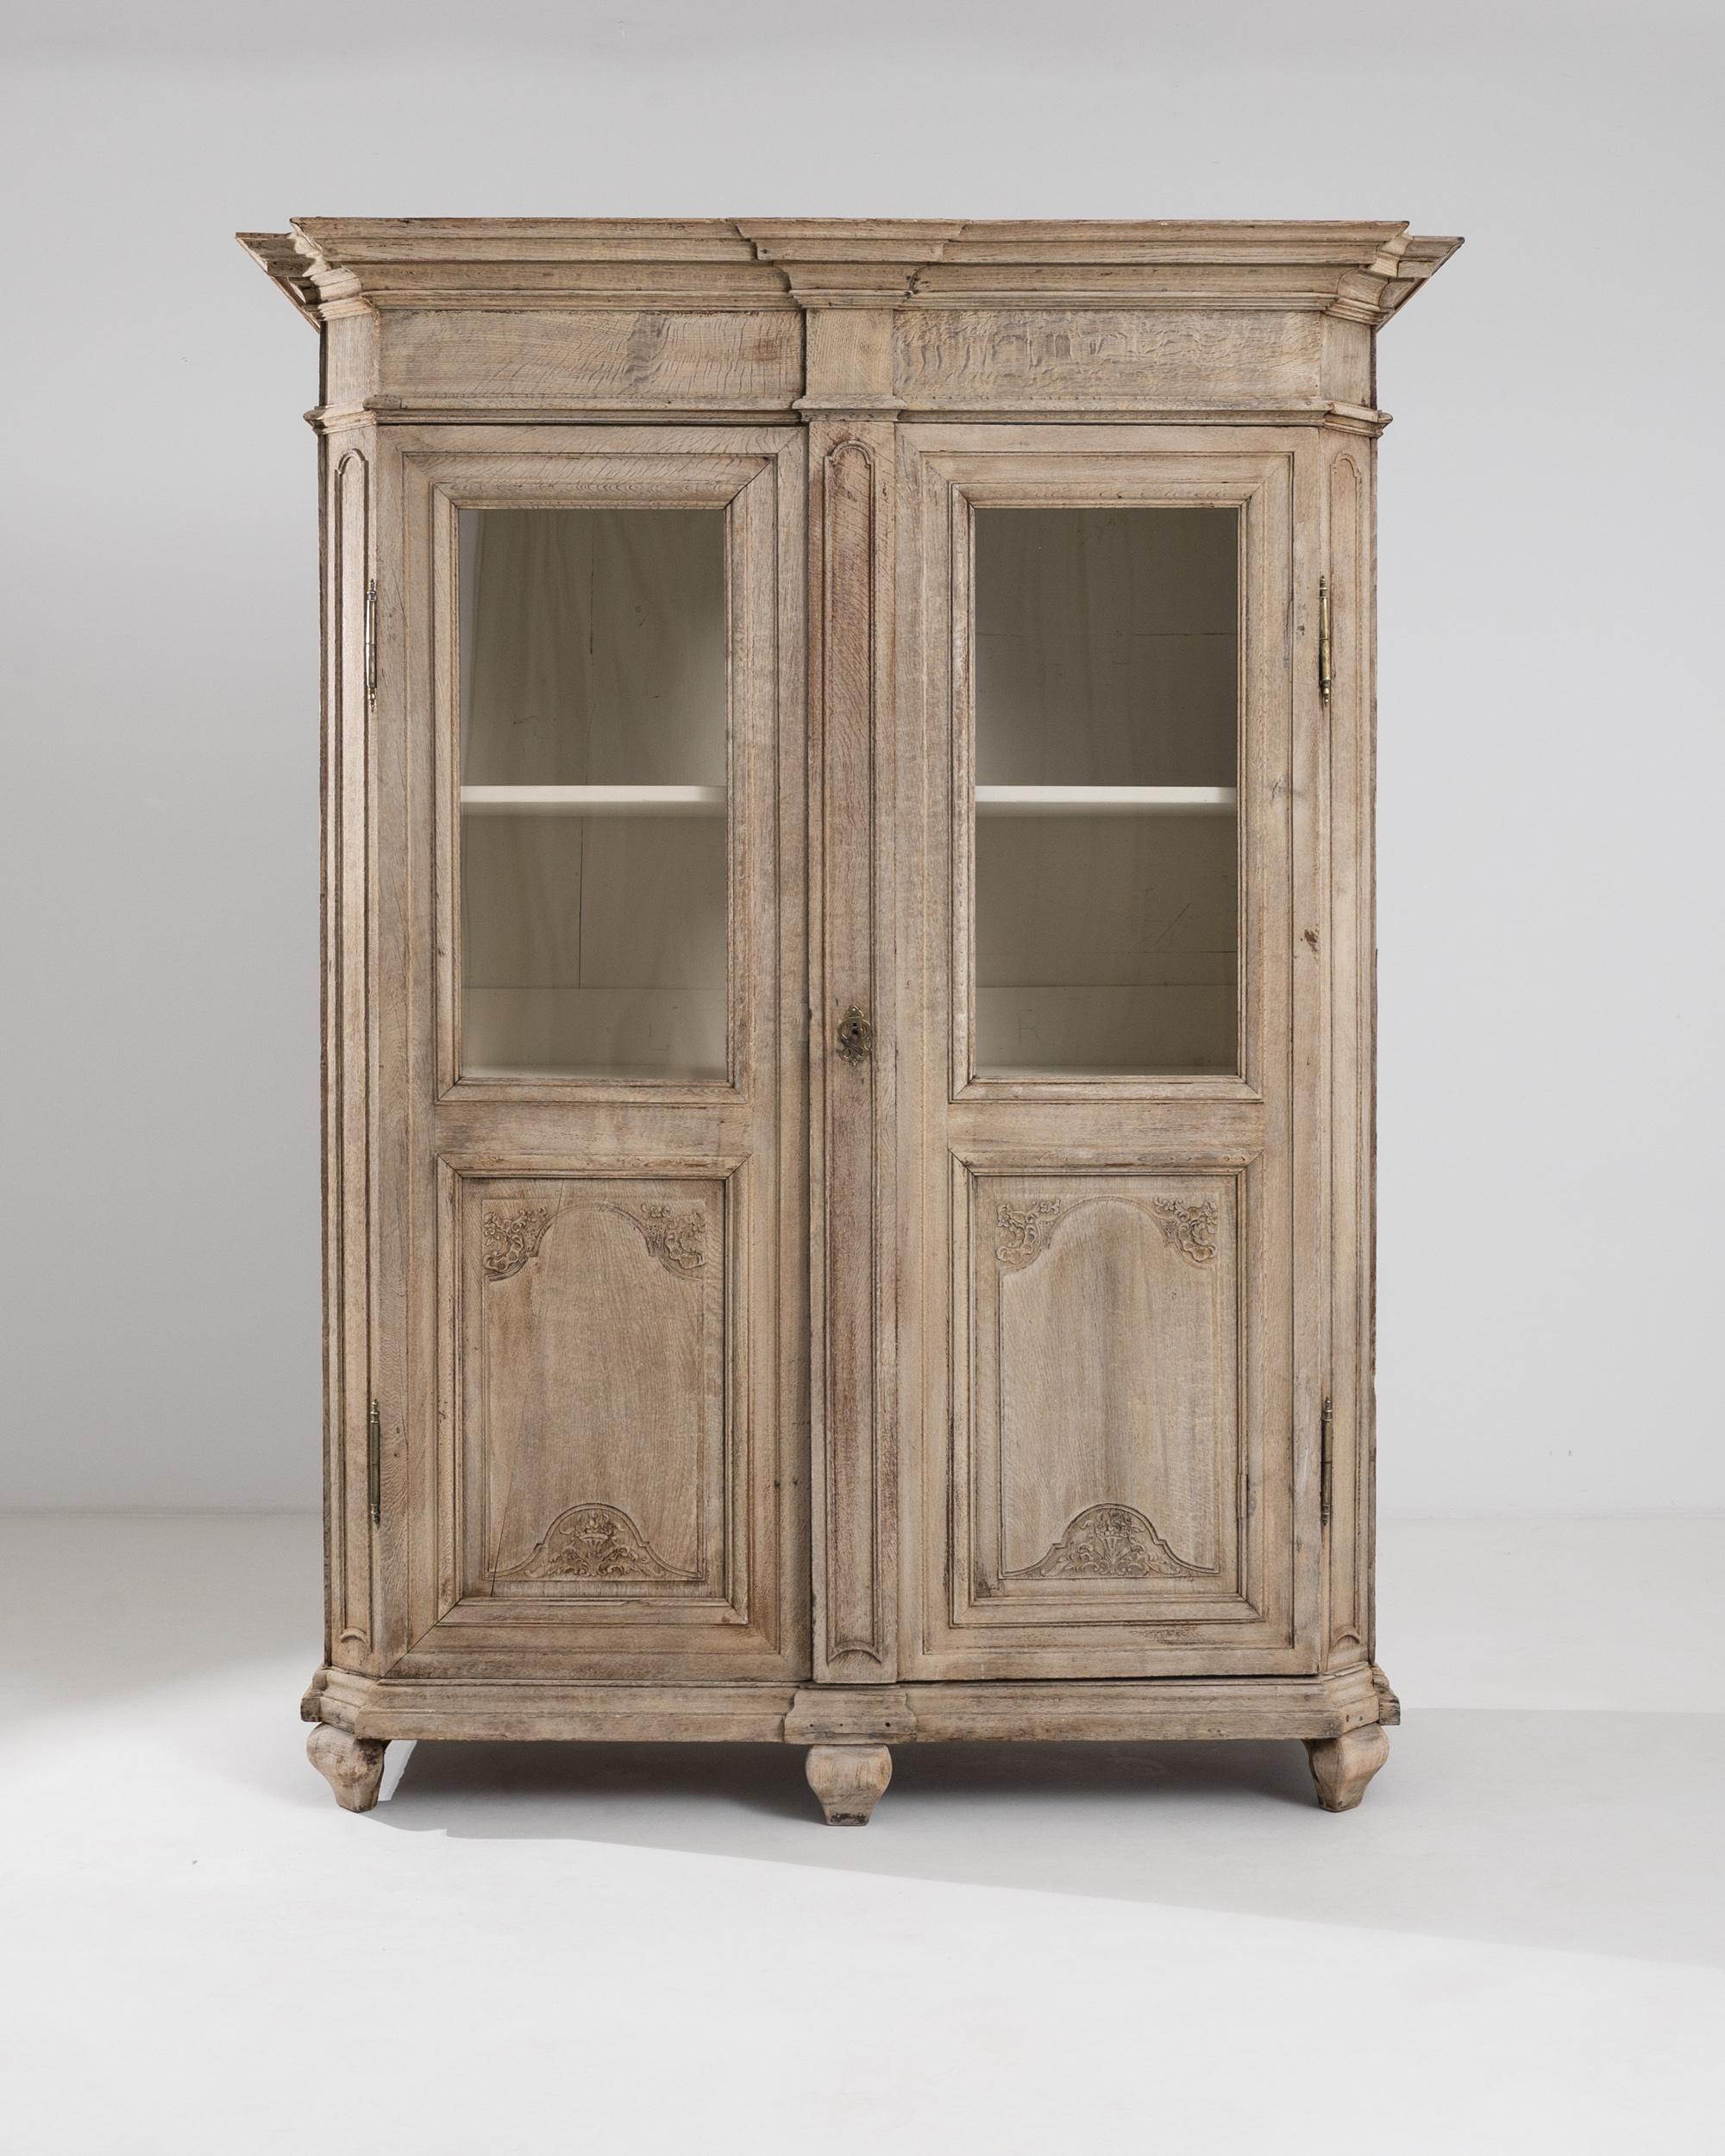 This antique oak vitrine possesses a springtime freshness. Built in Belgium circa 1800, the faceted form of the cabinet creates an impression of delicacy despite its ample size. A magnificent tiered cornice adds a crowning detail, while at the base